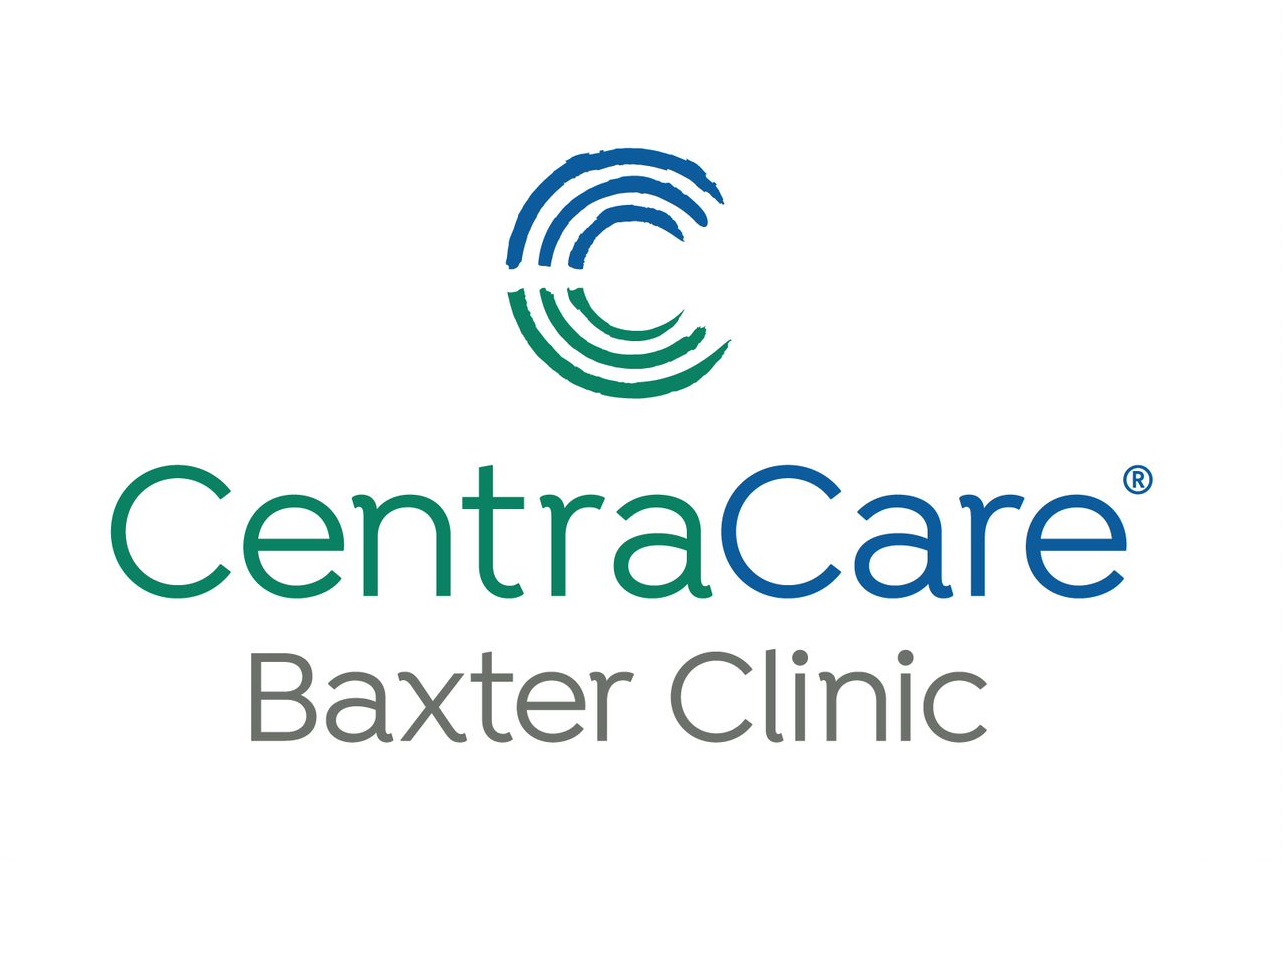 CentraCare Baxter Clinic